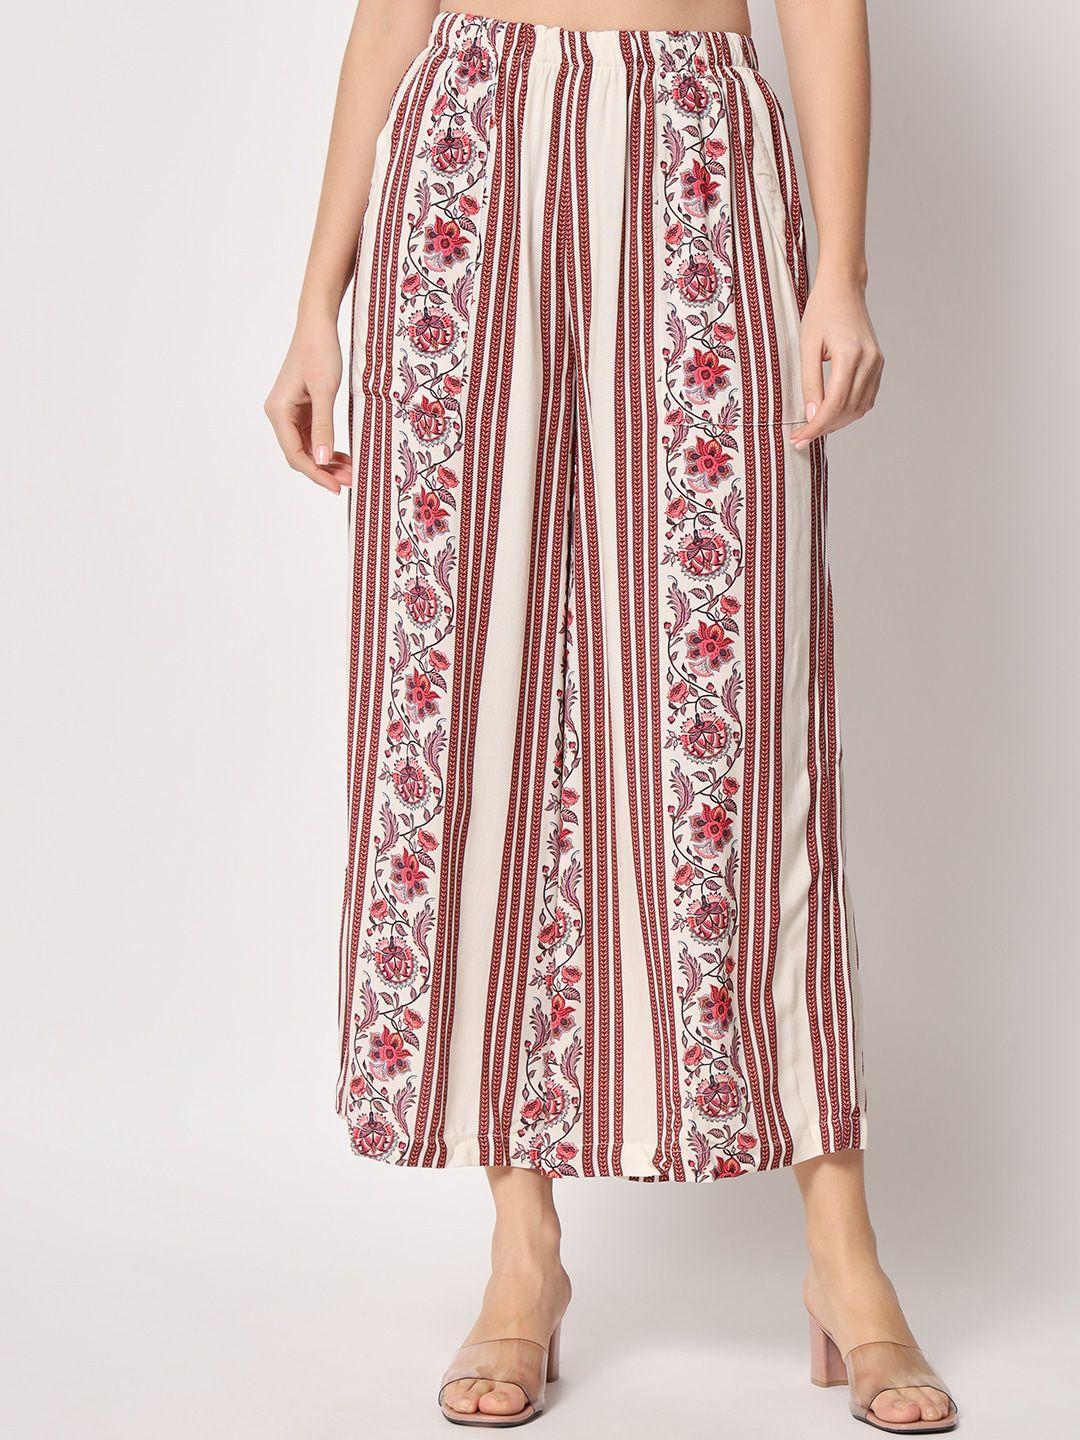 d-'vesh-women-floral-printed-comfort-loose-fit-easy-wash-culottes-trousers